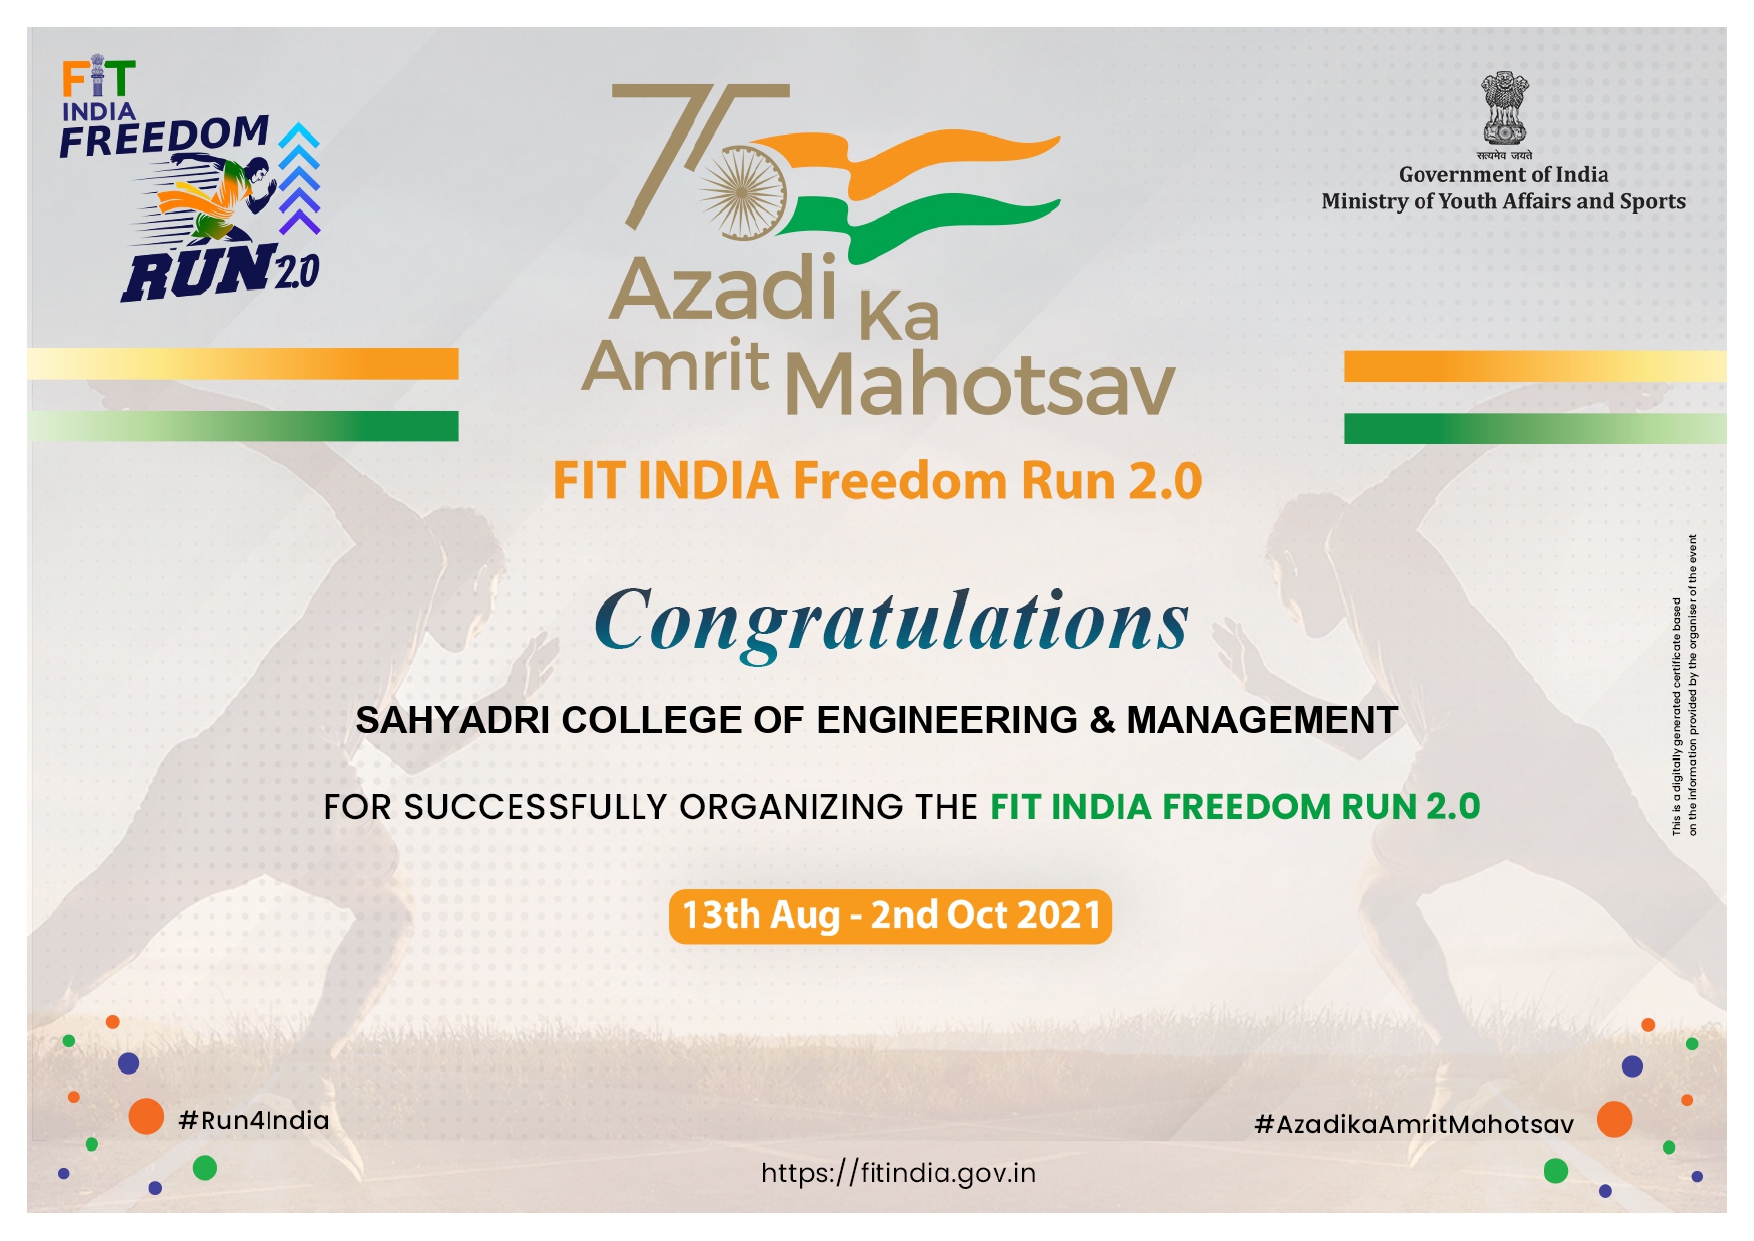 Sahyadri receives Certificate of Appreciation from Govt. of India for organizing Fit India Freedom Run 2.0